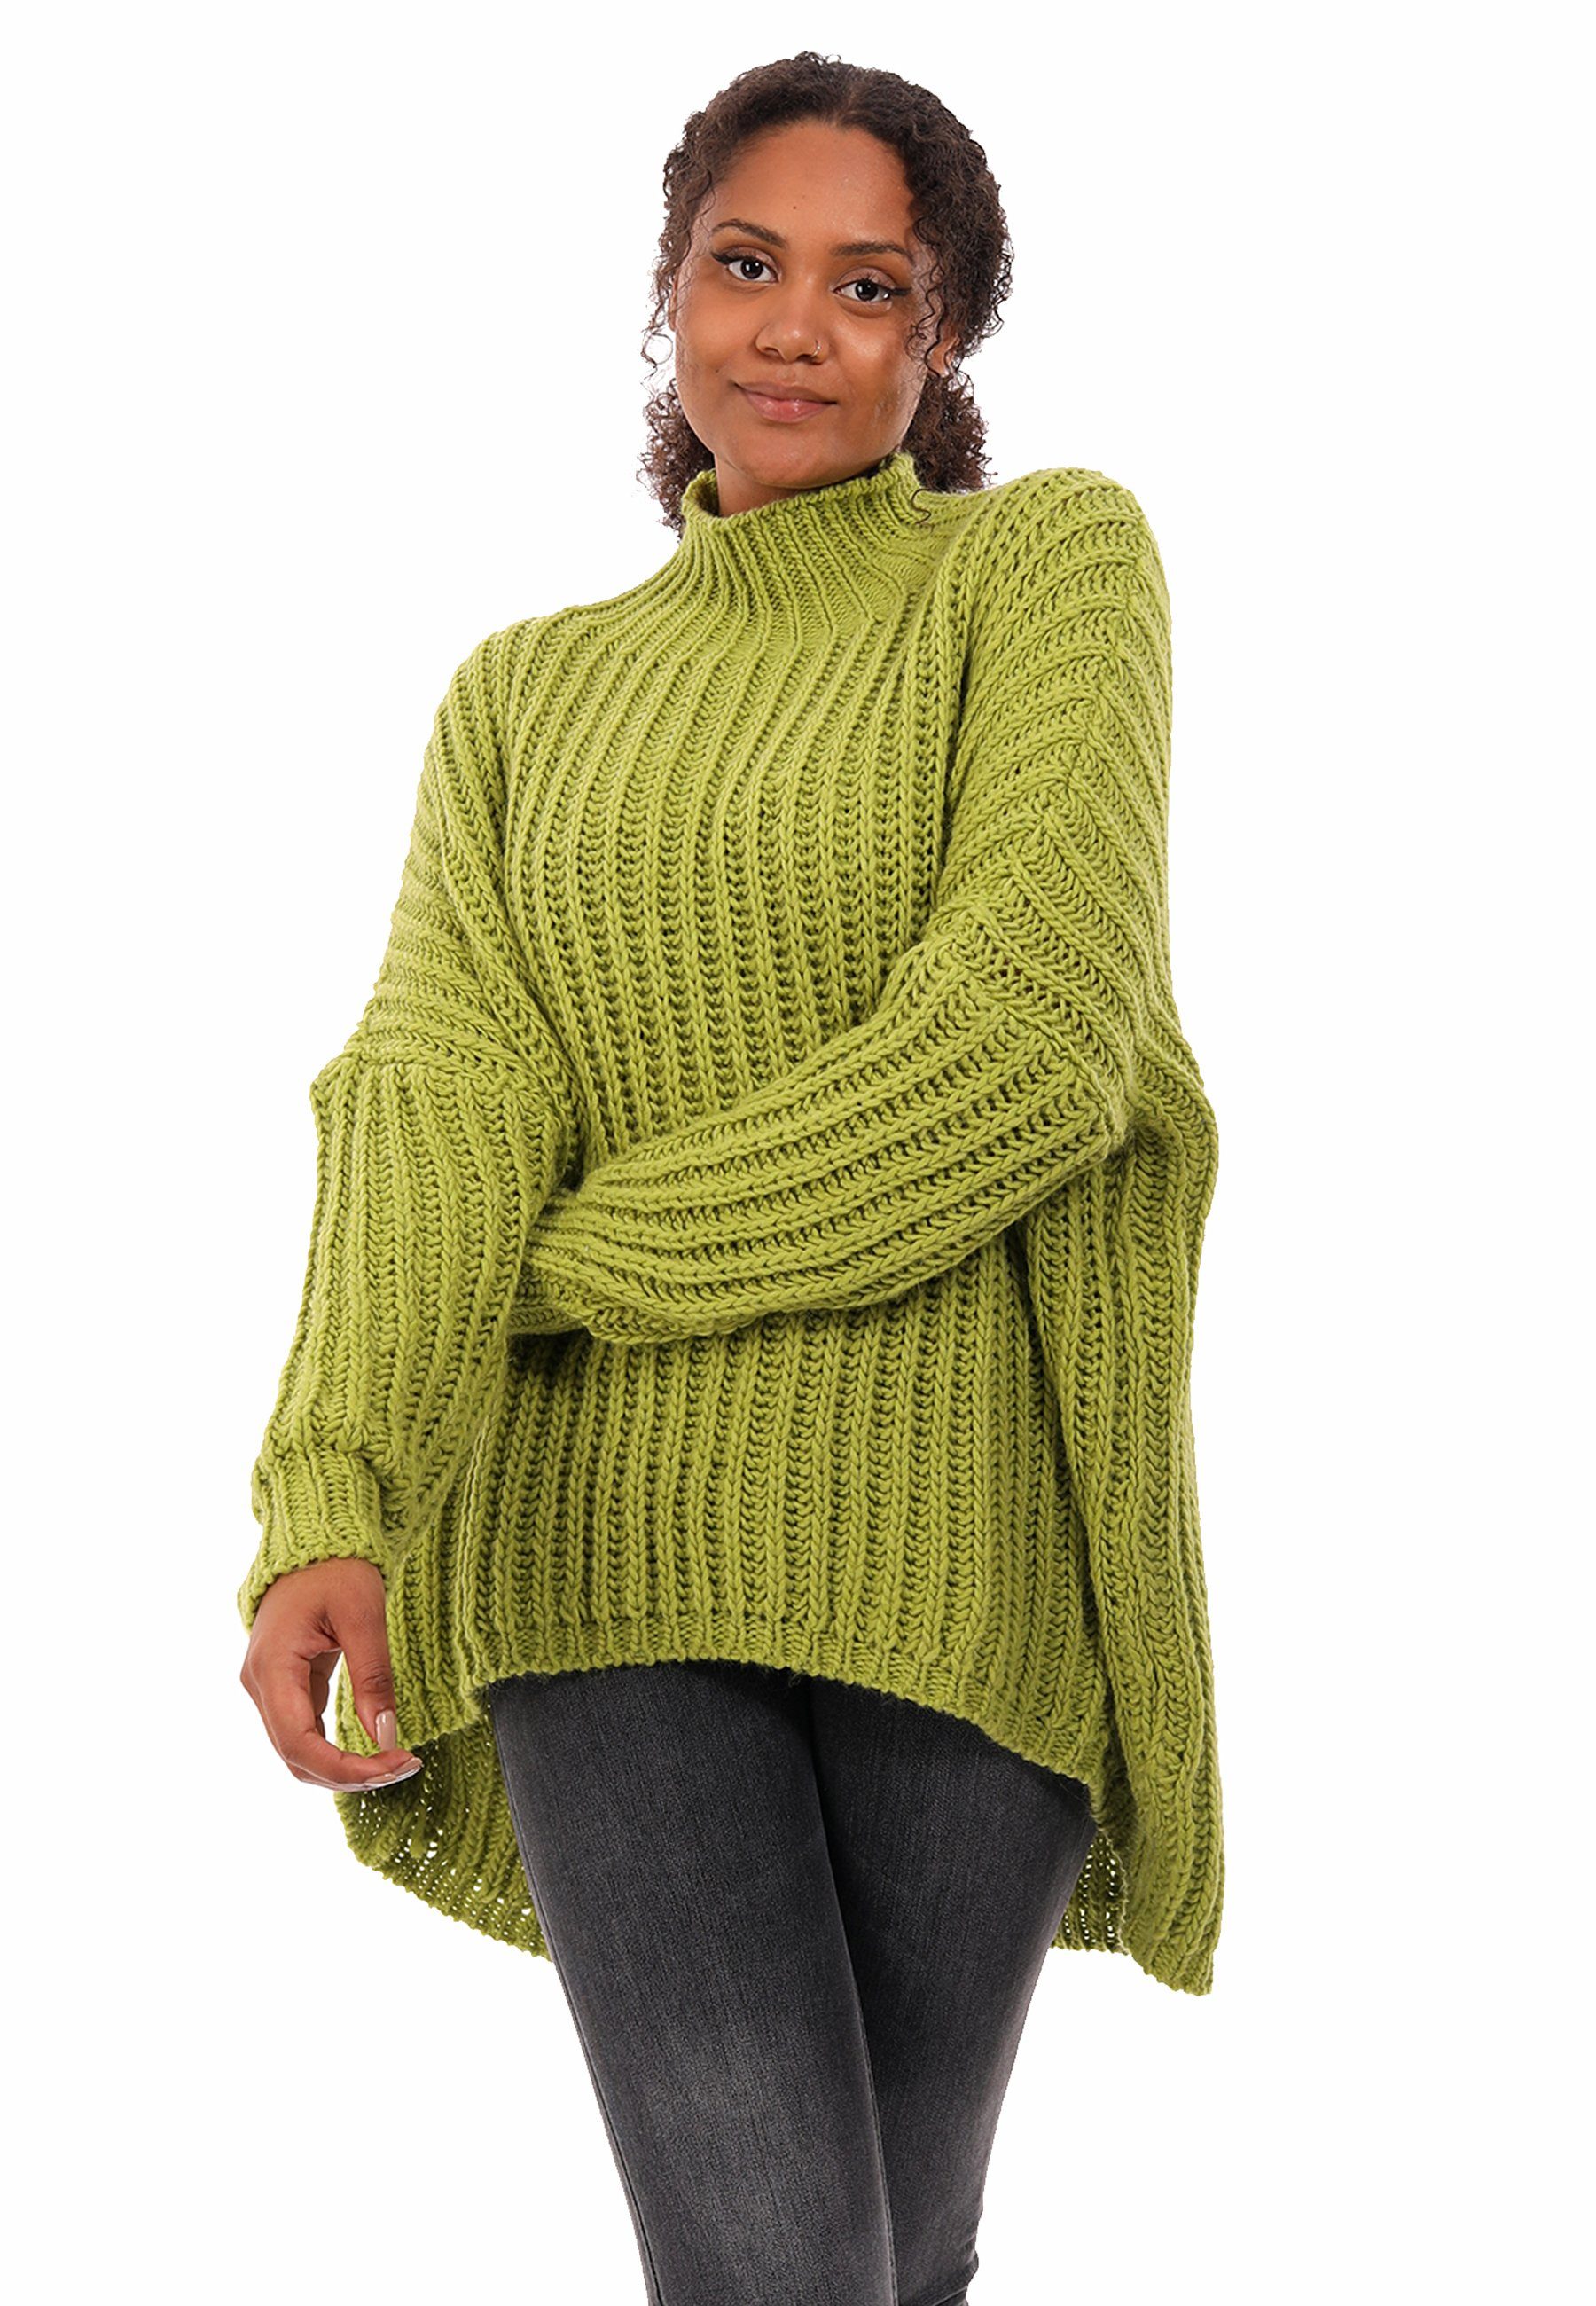 YC Fashion & Style Longpullover Oversized Pullover Grobstrick Vokuhila Sweater One Size (1-tlg) casual limegreen